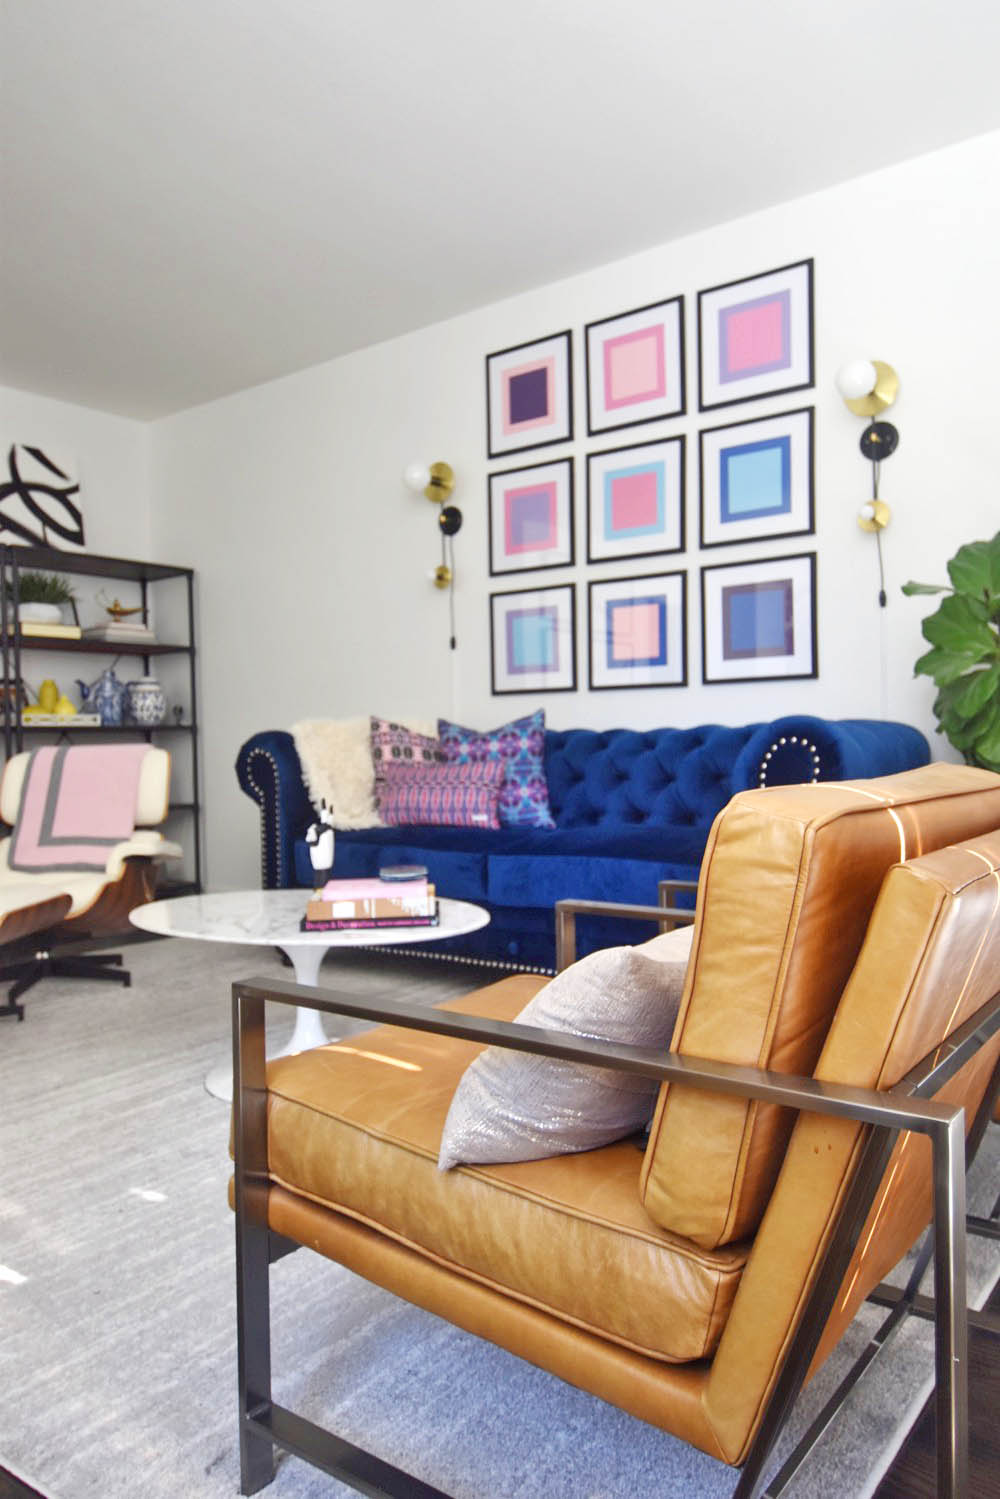 Midcentury glam living room, navy chesterfield sofa, saarinen tulip table, pop art, pink and blue, eames lounge chair, leather arm chair